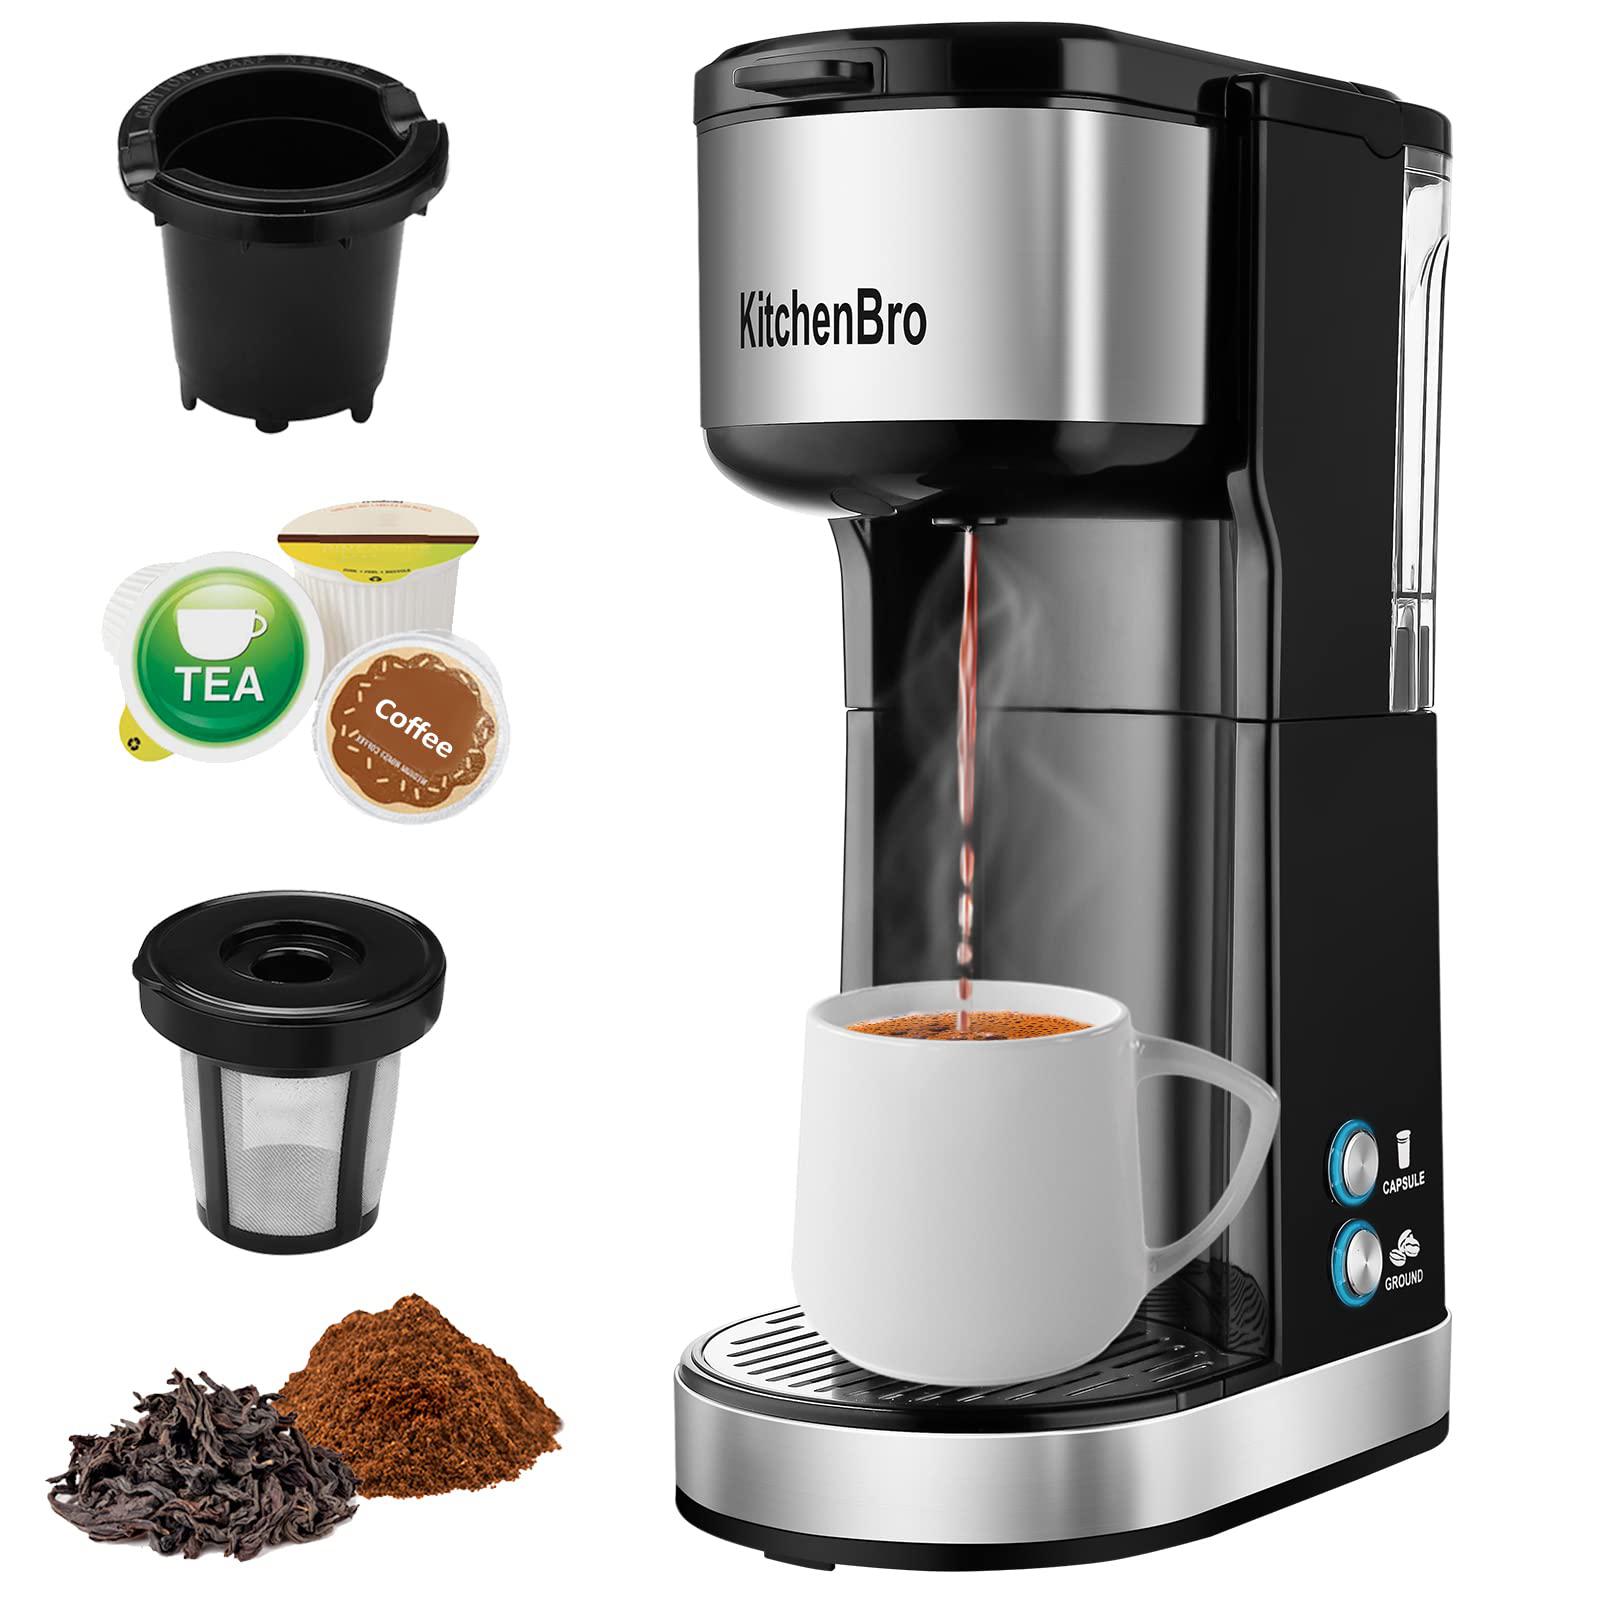 KitchenBro single serve coffee maker k cup with reservoir, small pods coffee maker 6-14 oz brew size, mini single cup coffee maker fits 